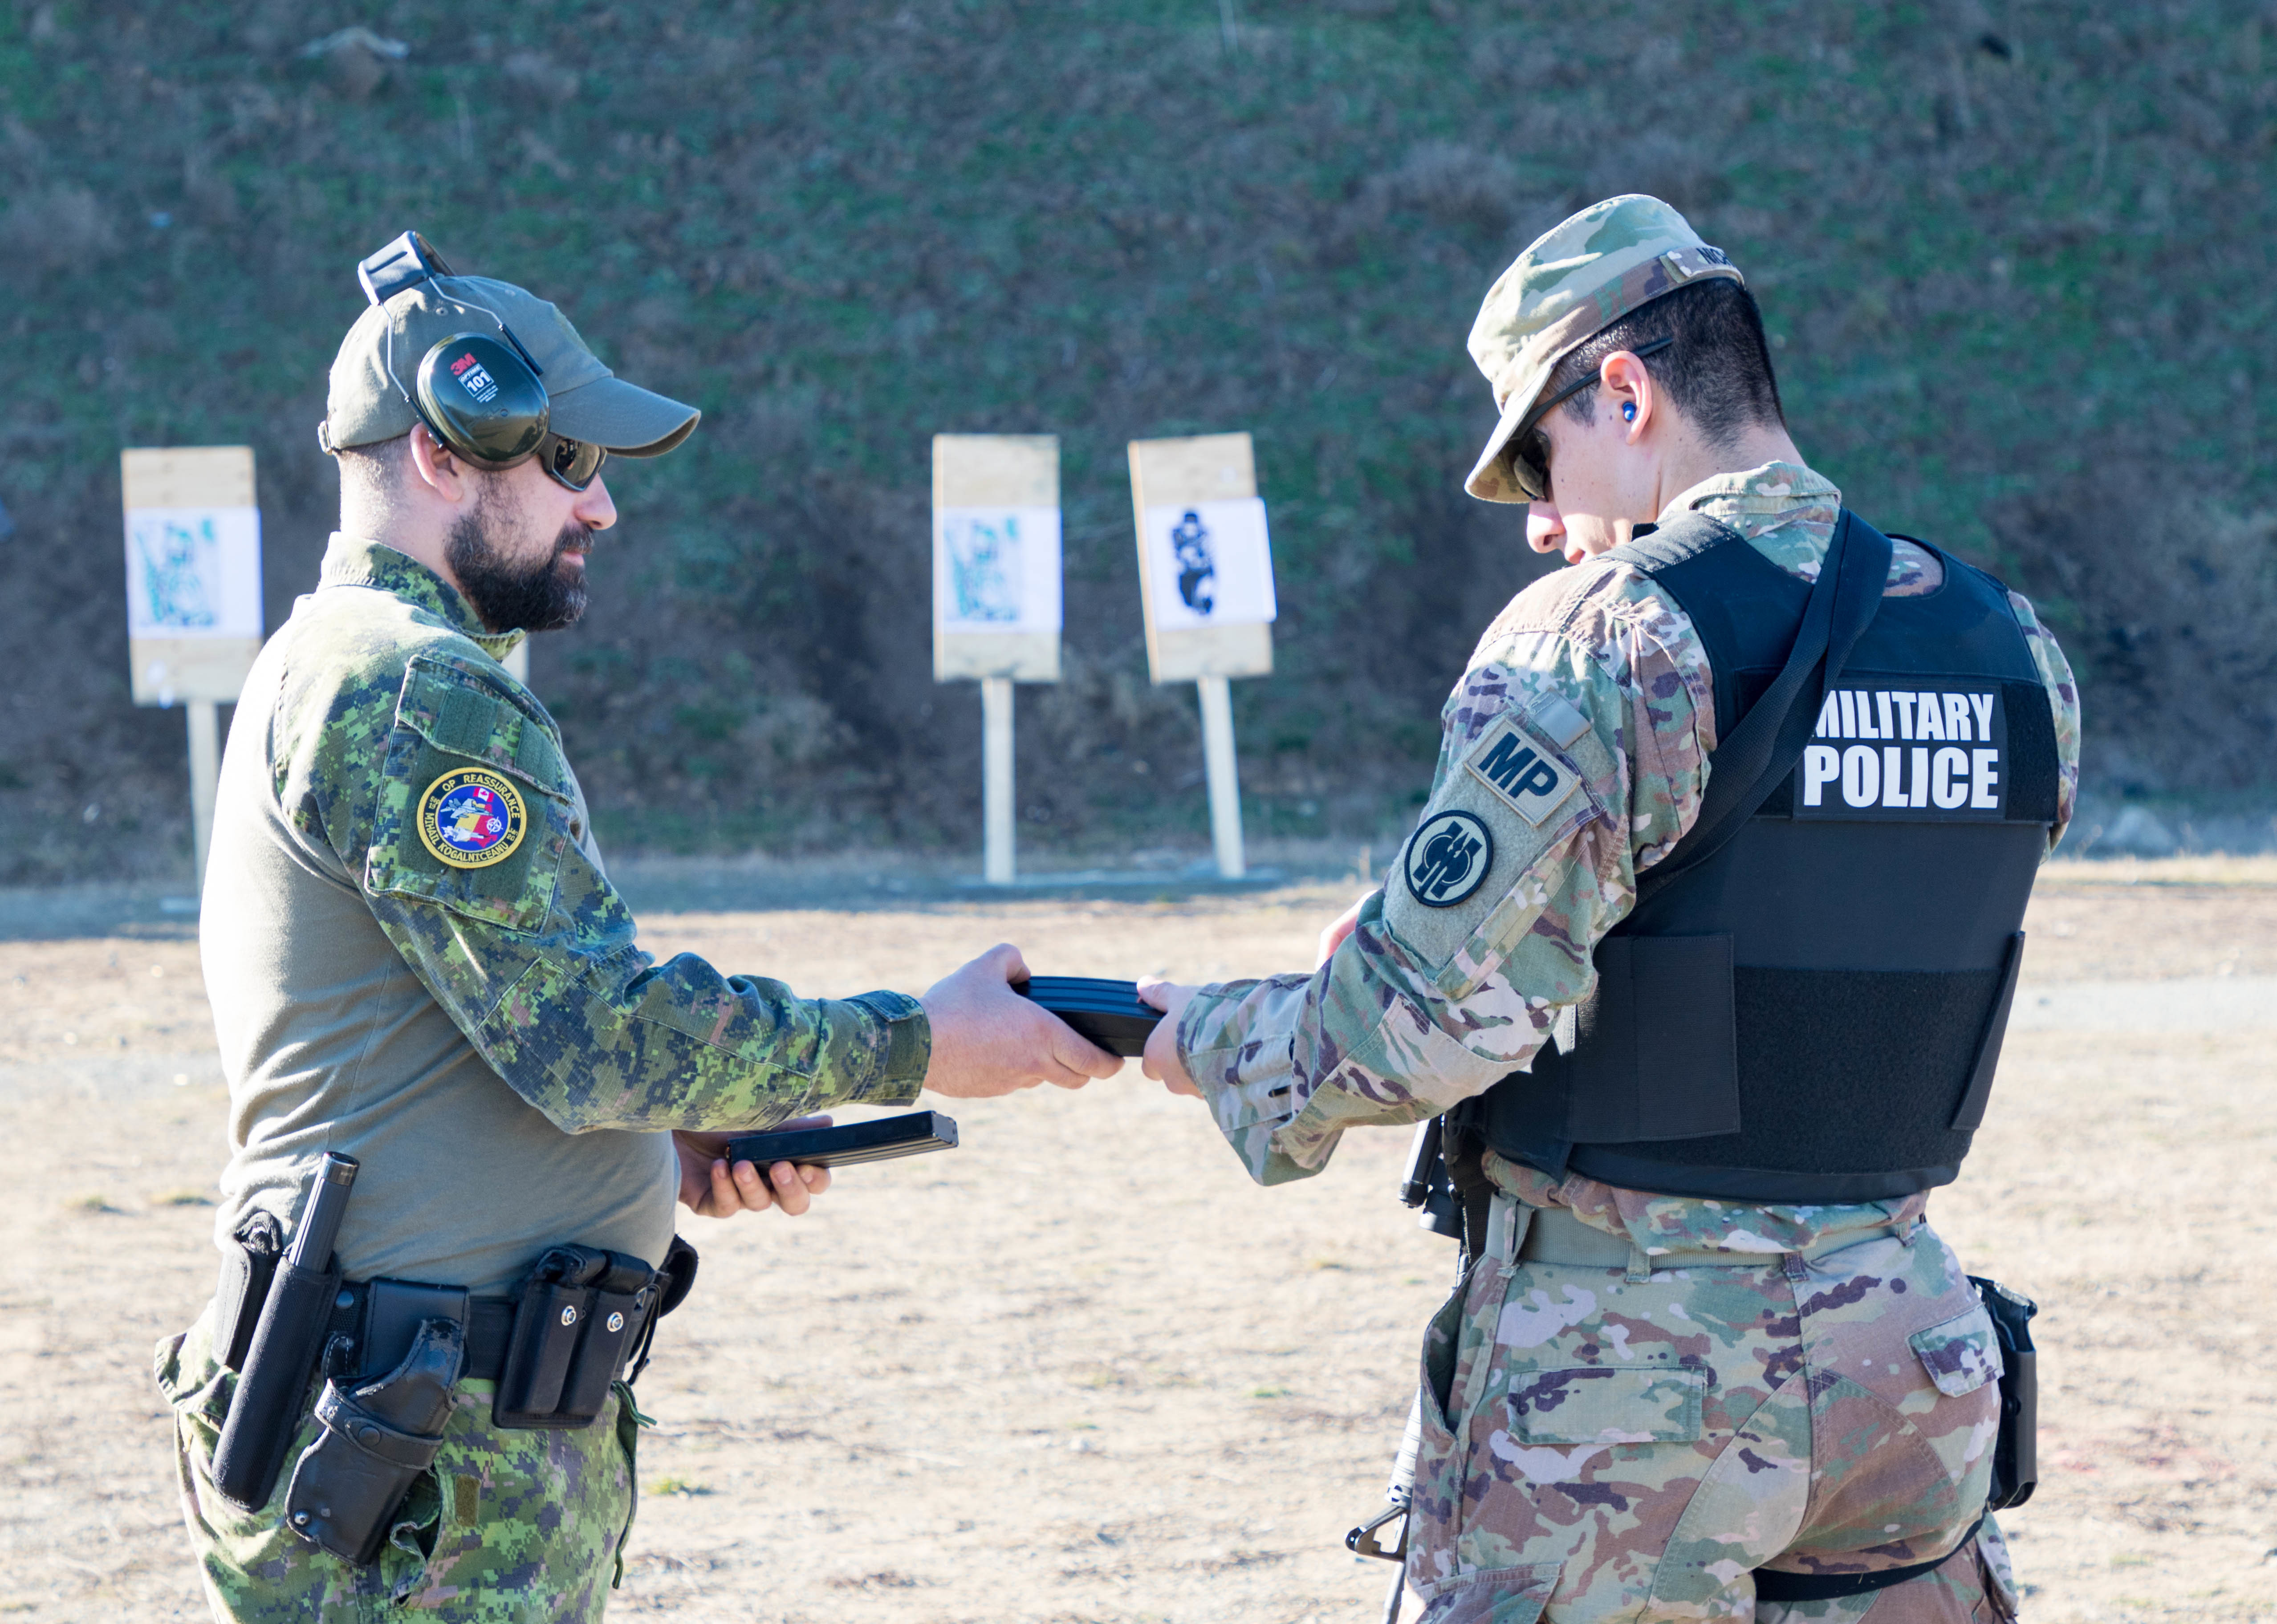 u-s-and-canadian-military-police-conduct-weapons-training-in-romania-u-s-army-reserve-news